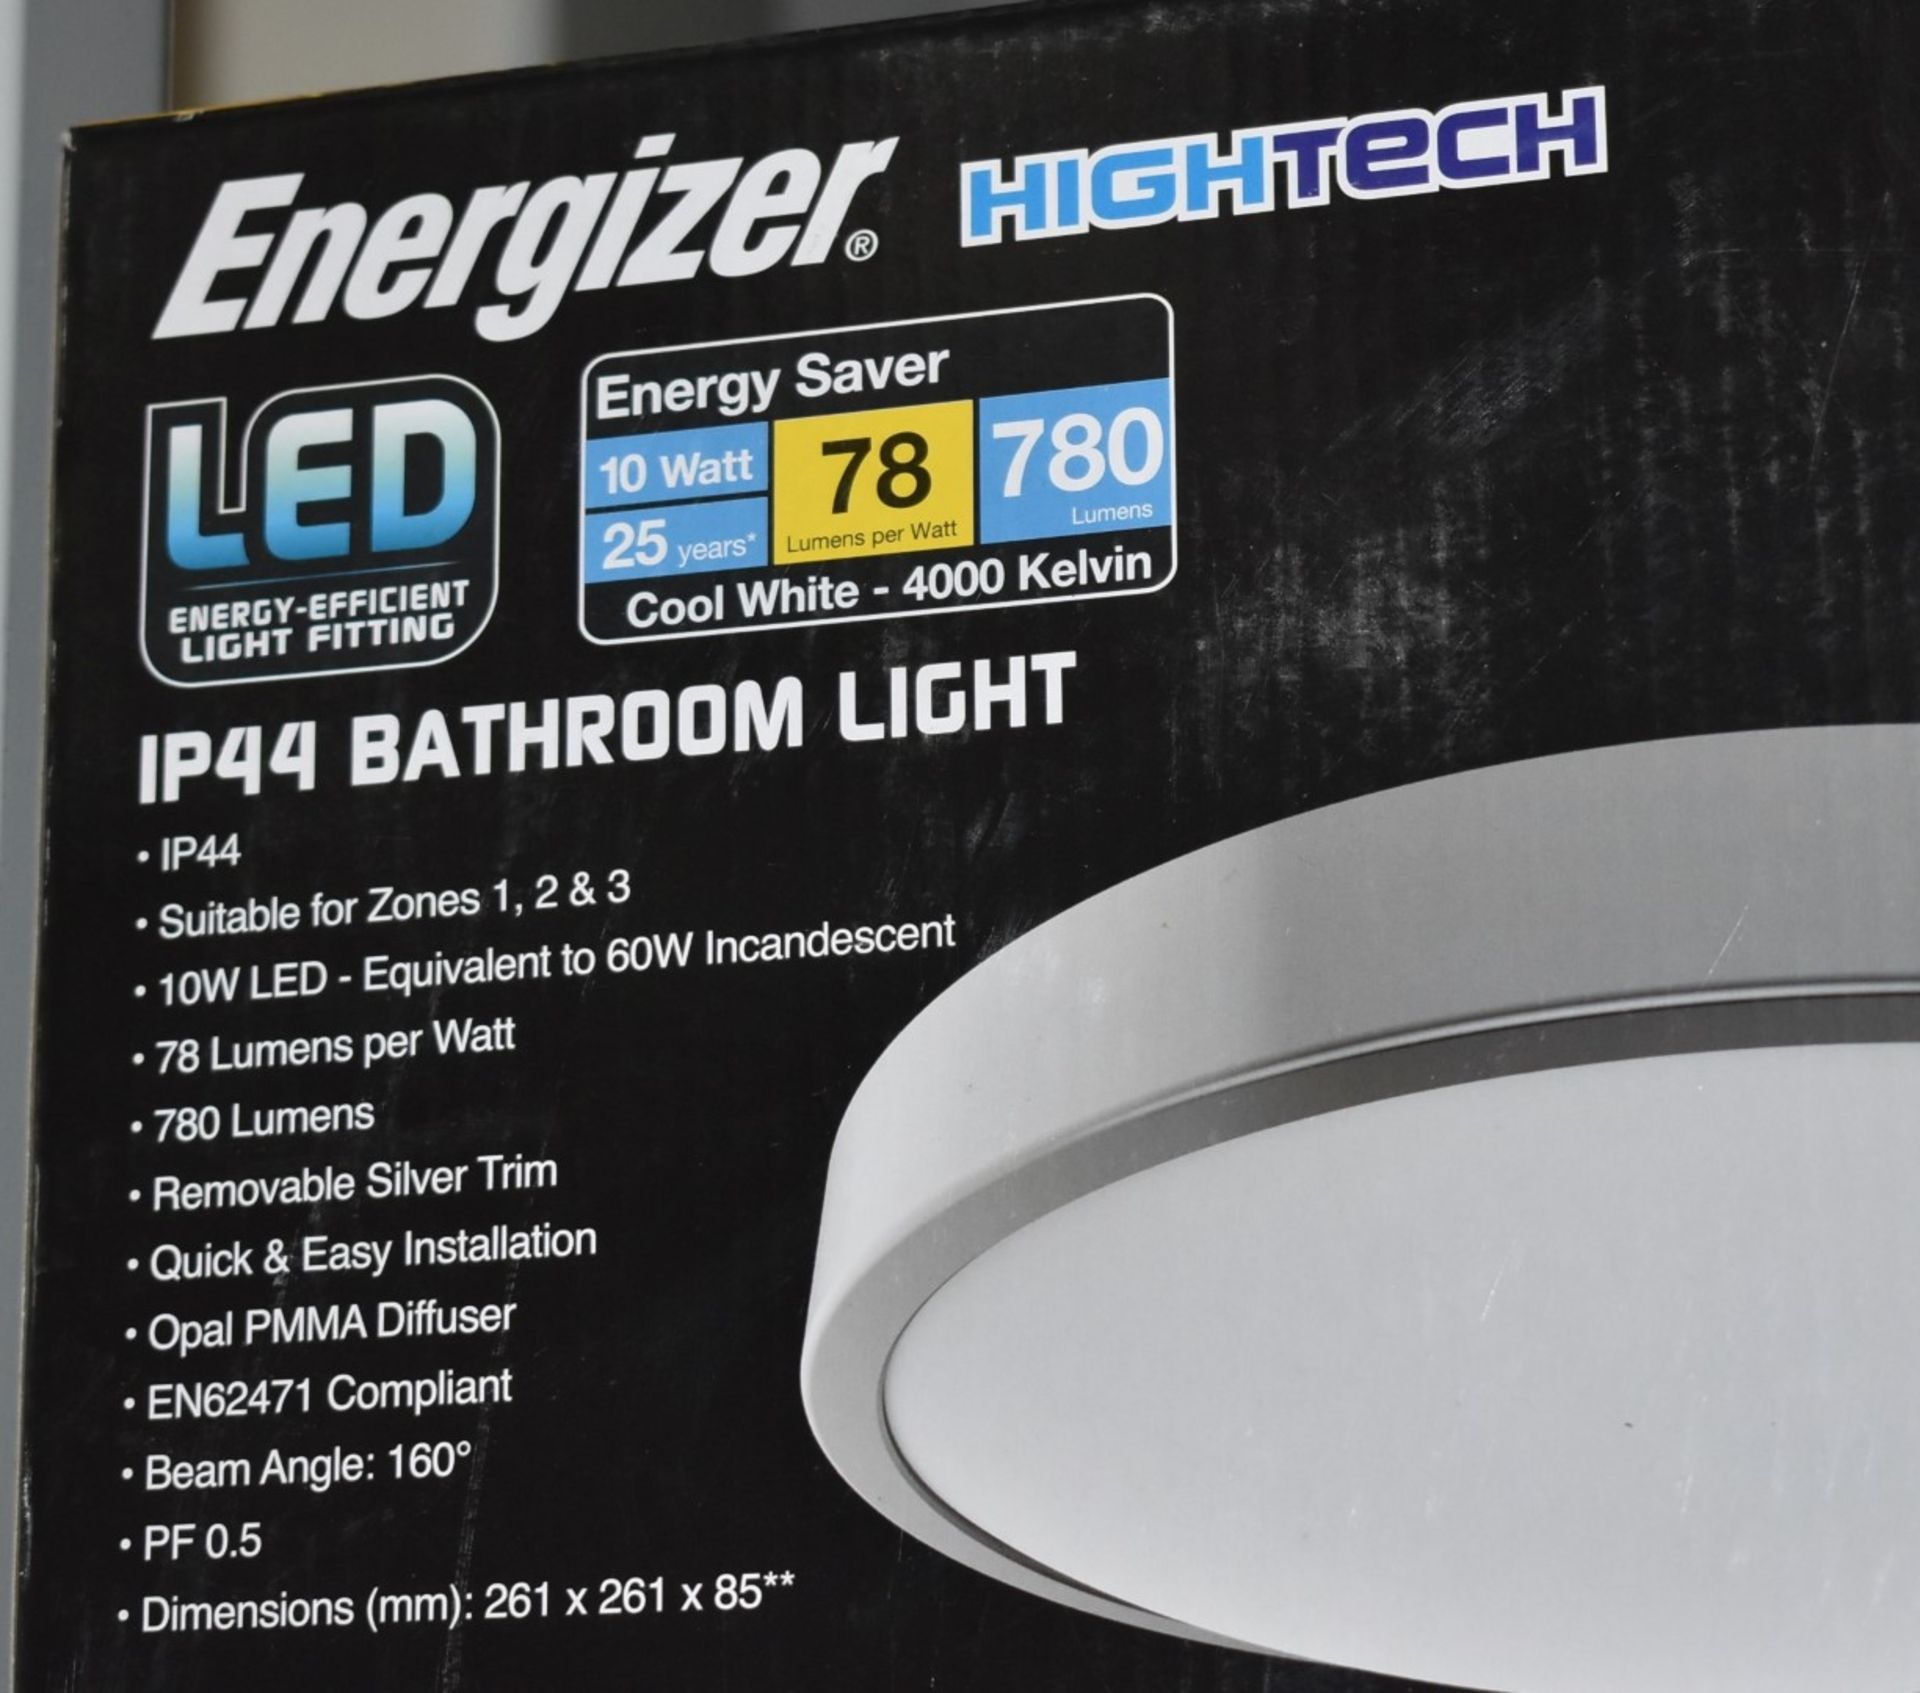 1 x Energizer 10w LED Bathroom Light - IP44 Rated - 4000k Cool White - Silver Finish With Opal - Image 4 of 5